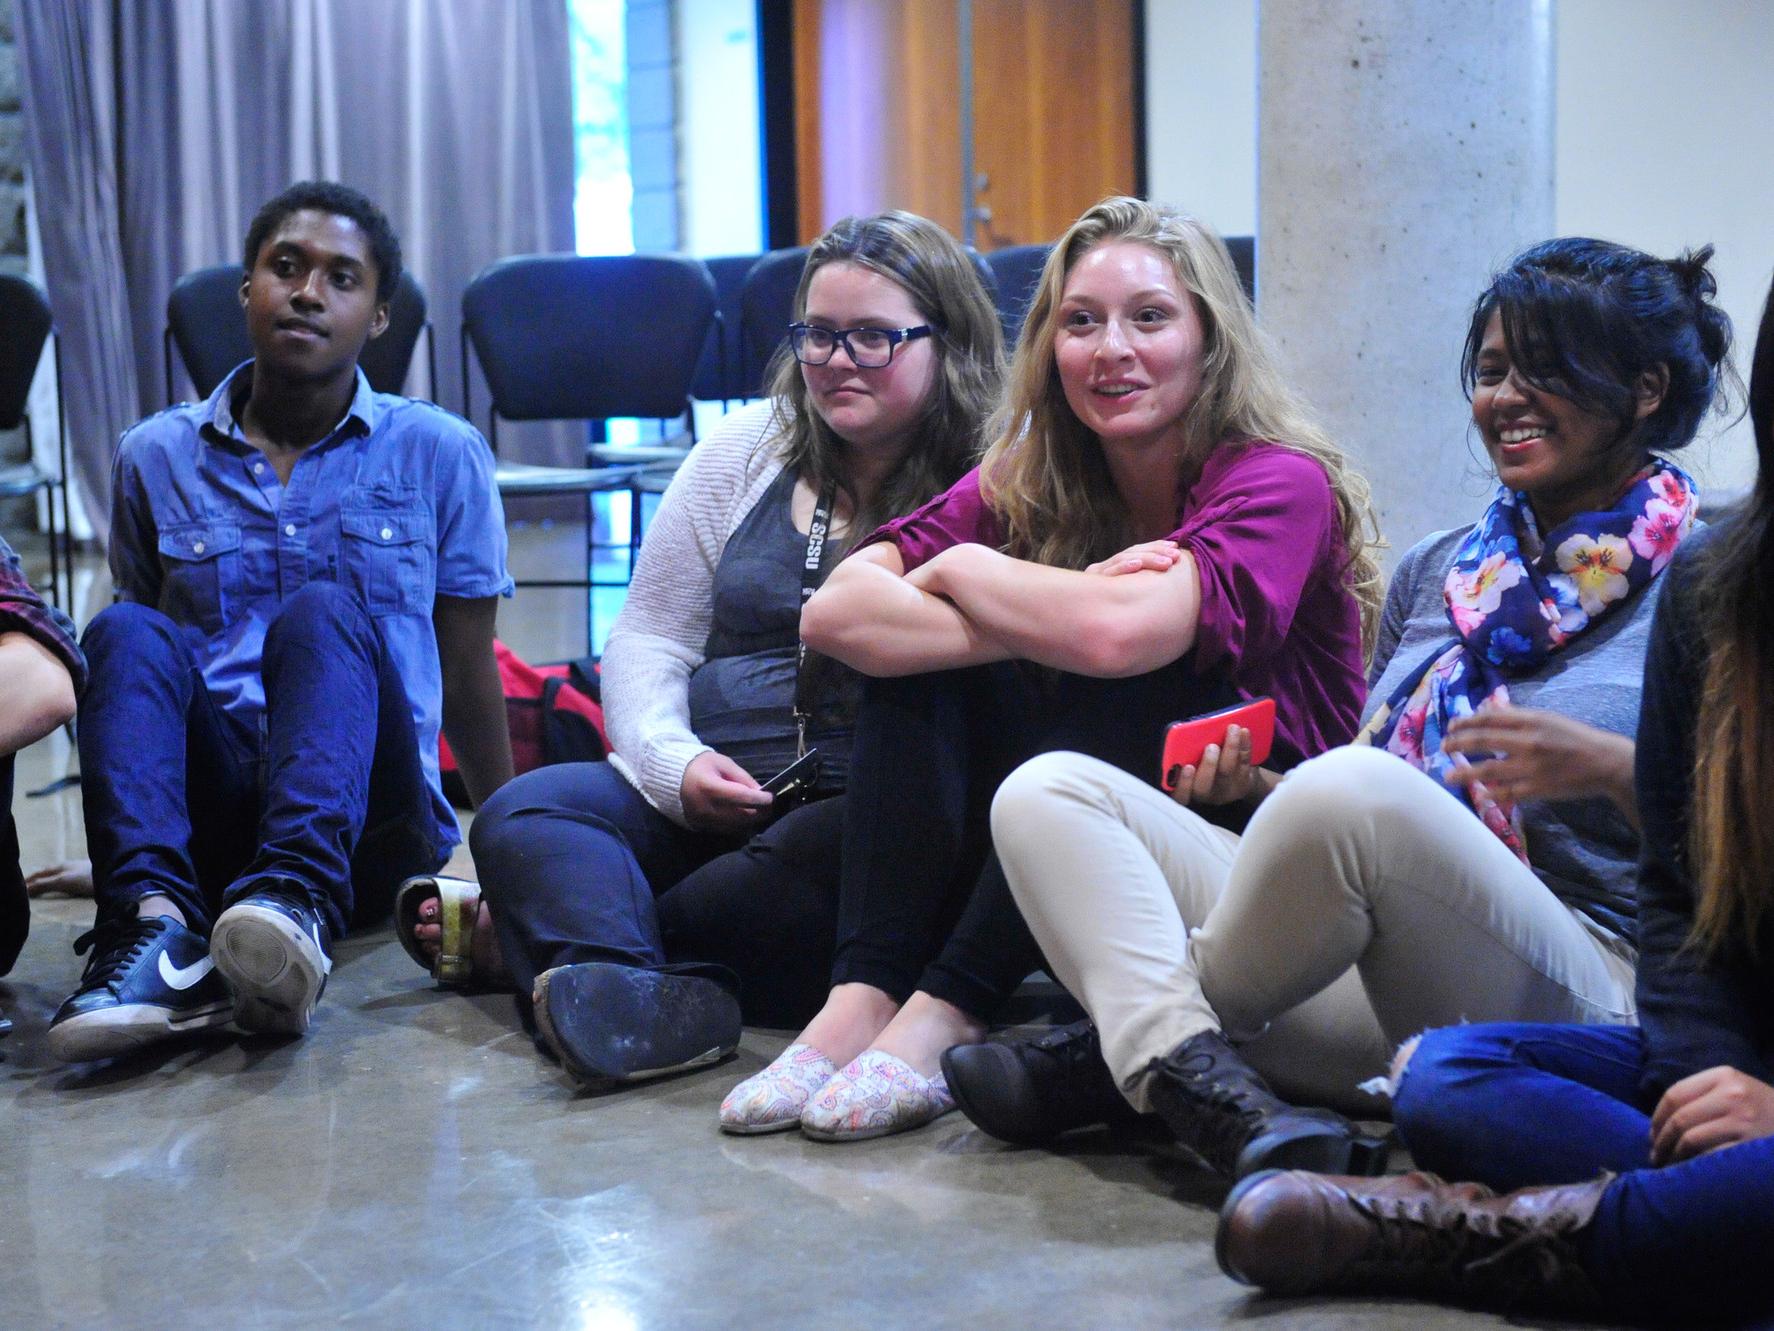 A group of students sitting on the floor listening to each other